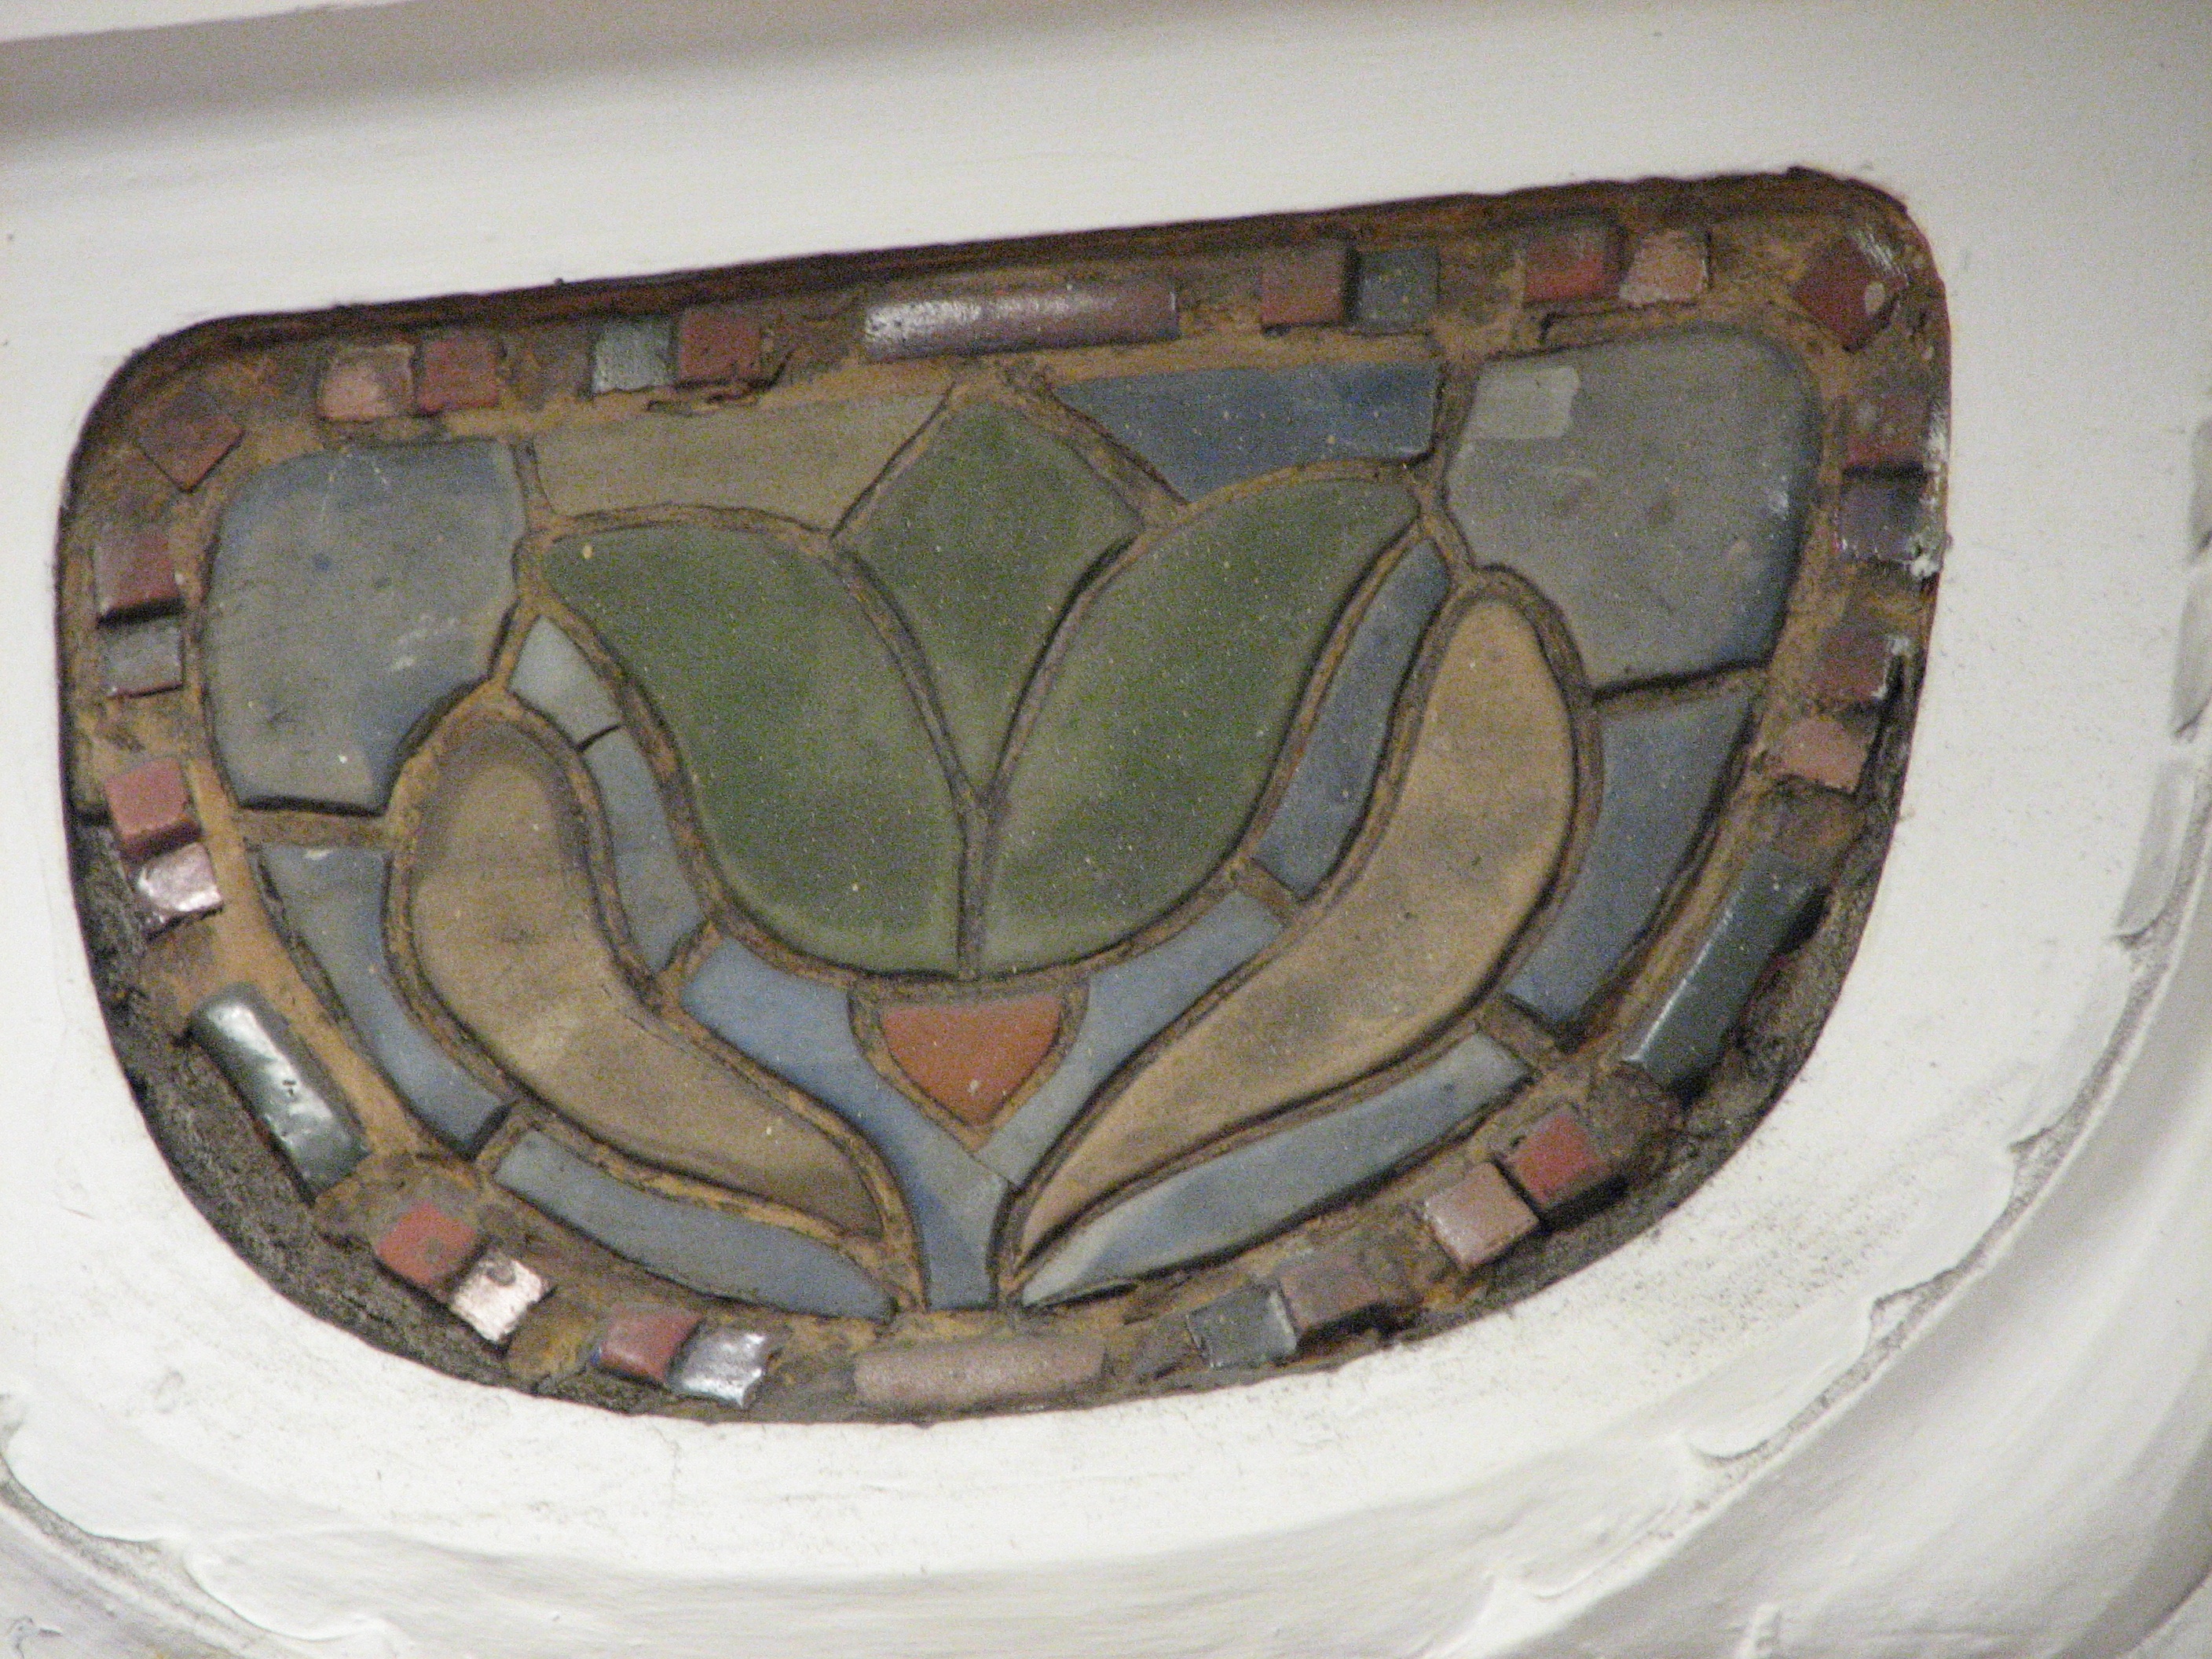 Arts & Crafts motifs are found in the tiled details of the building.